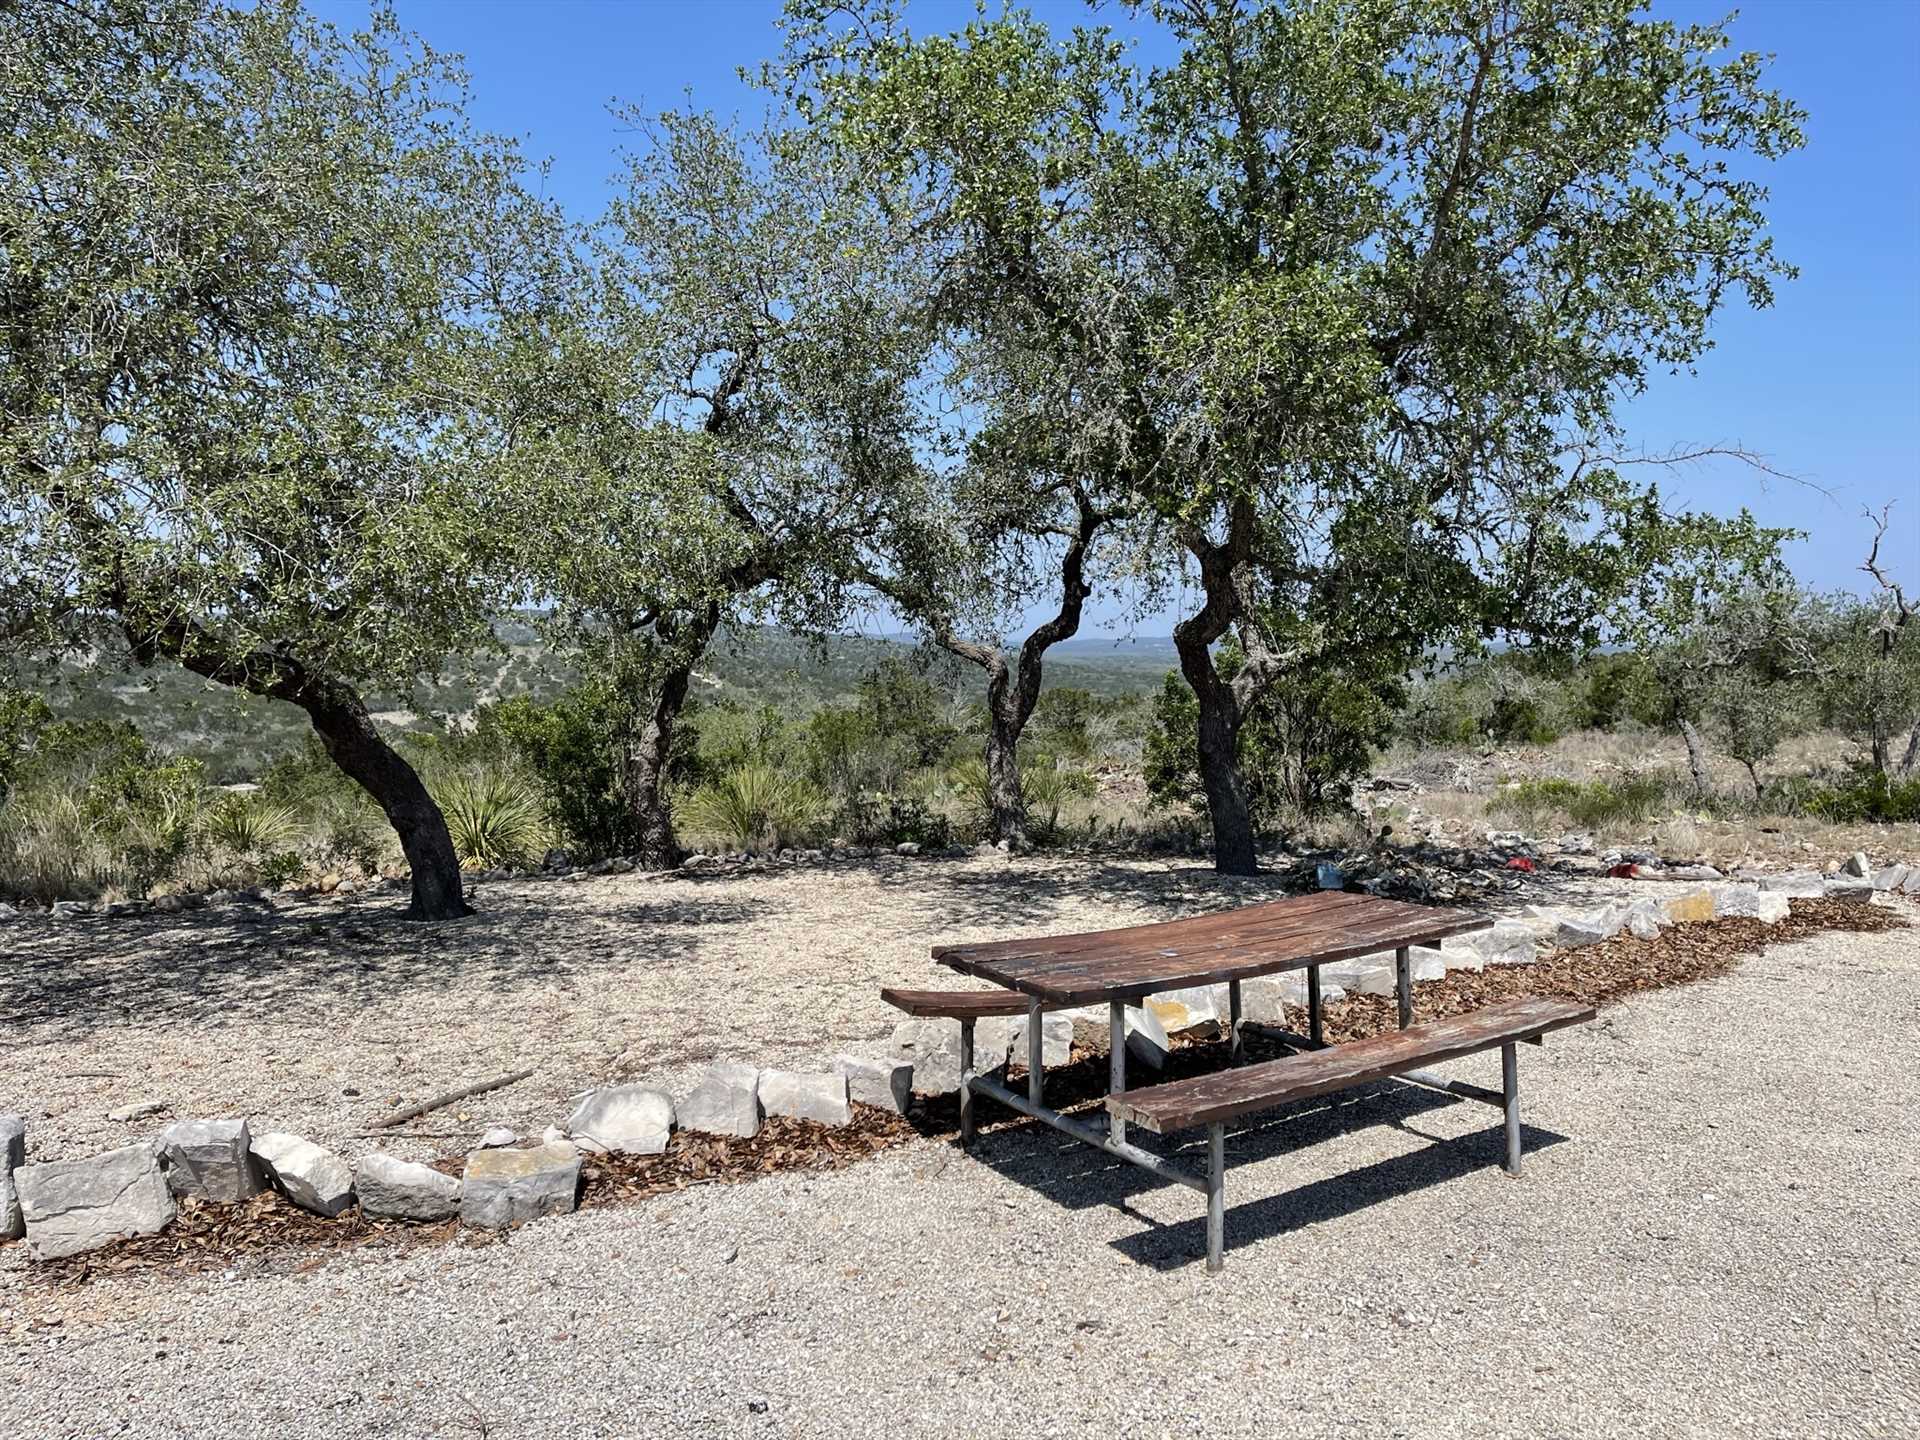                                                 A picnic table, a gas grill nearby, fresh Hill Country air, and inspiring views: sounds like the recipe for a great Texas cookout!